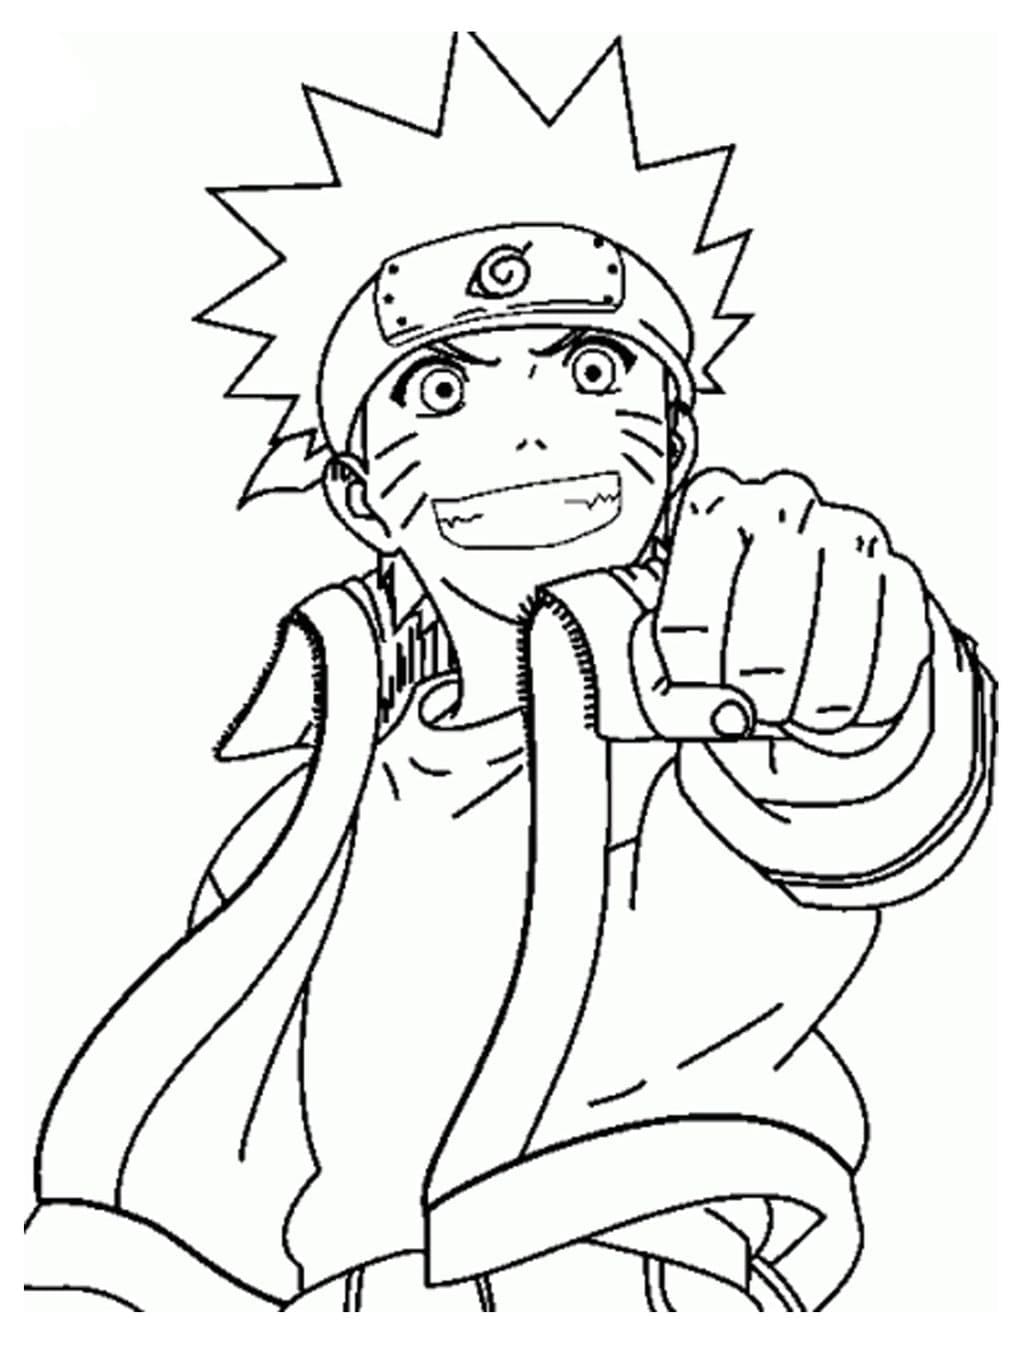 Naruto Coloring Page Printable for Free Download